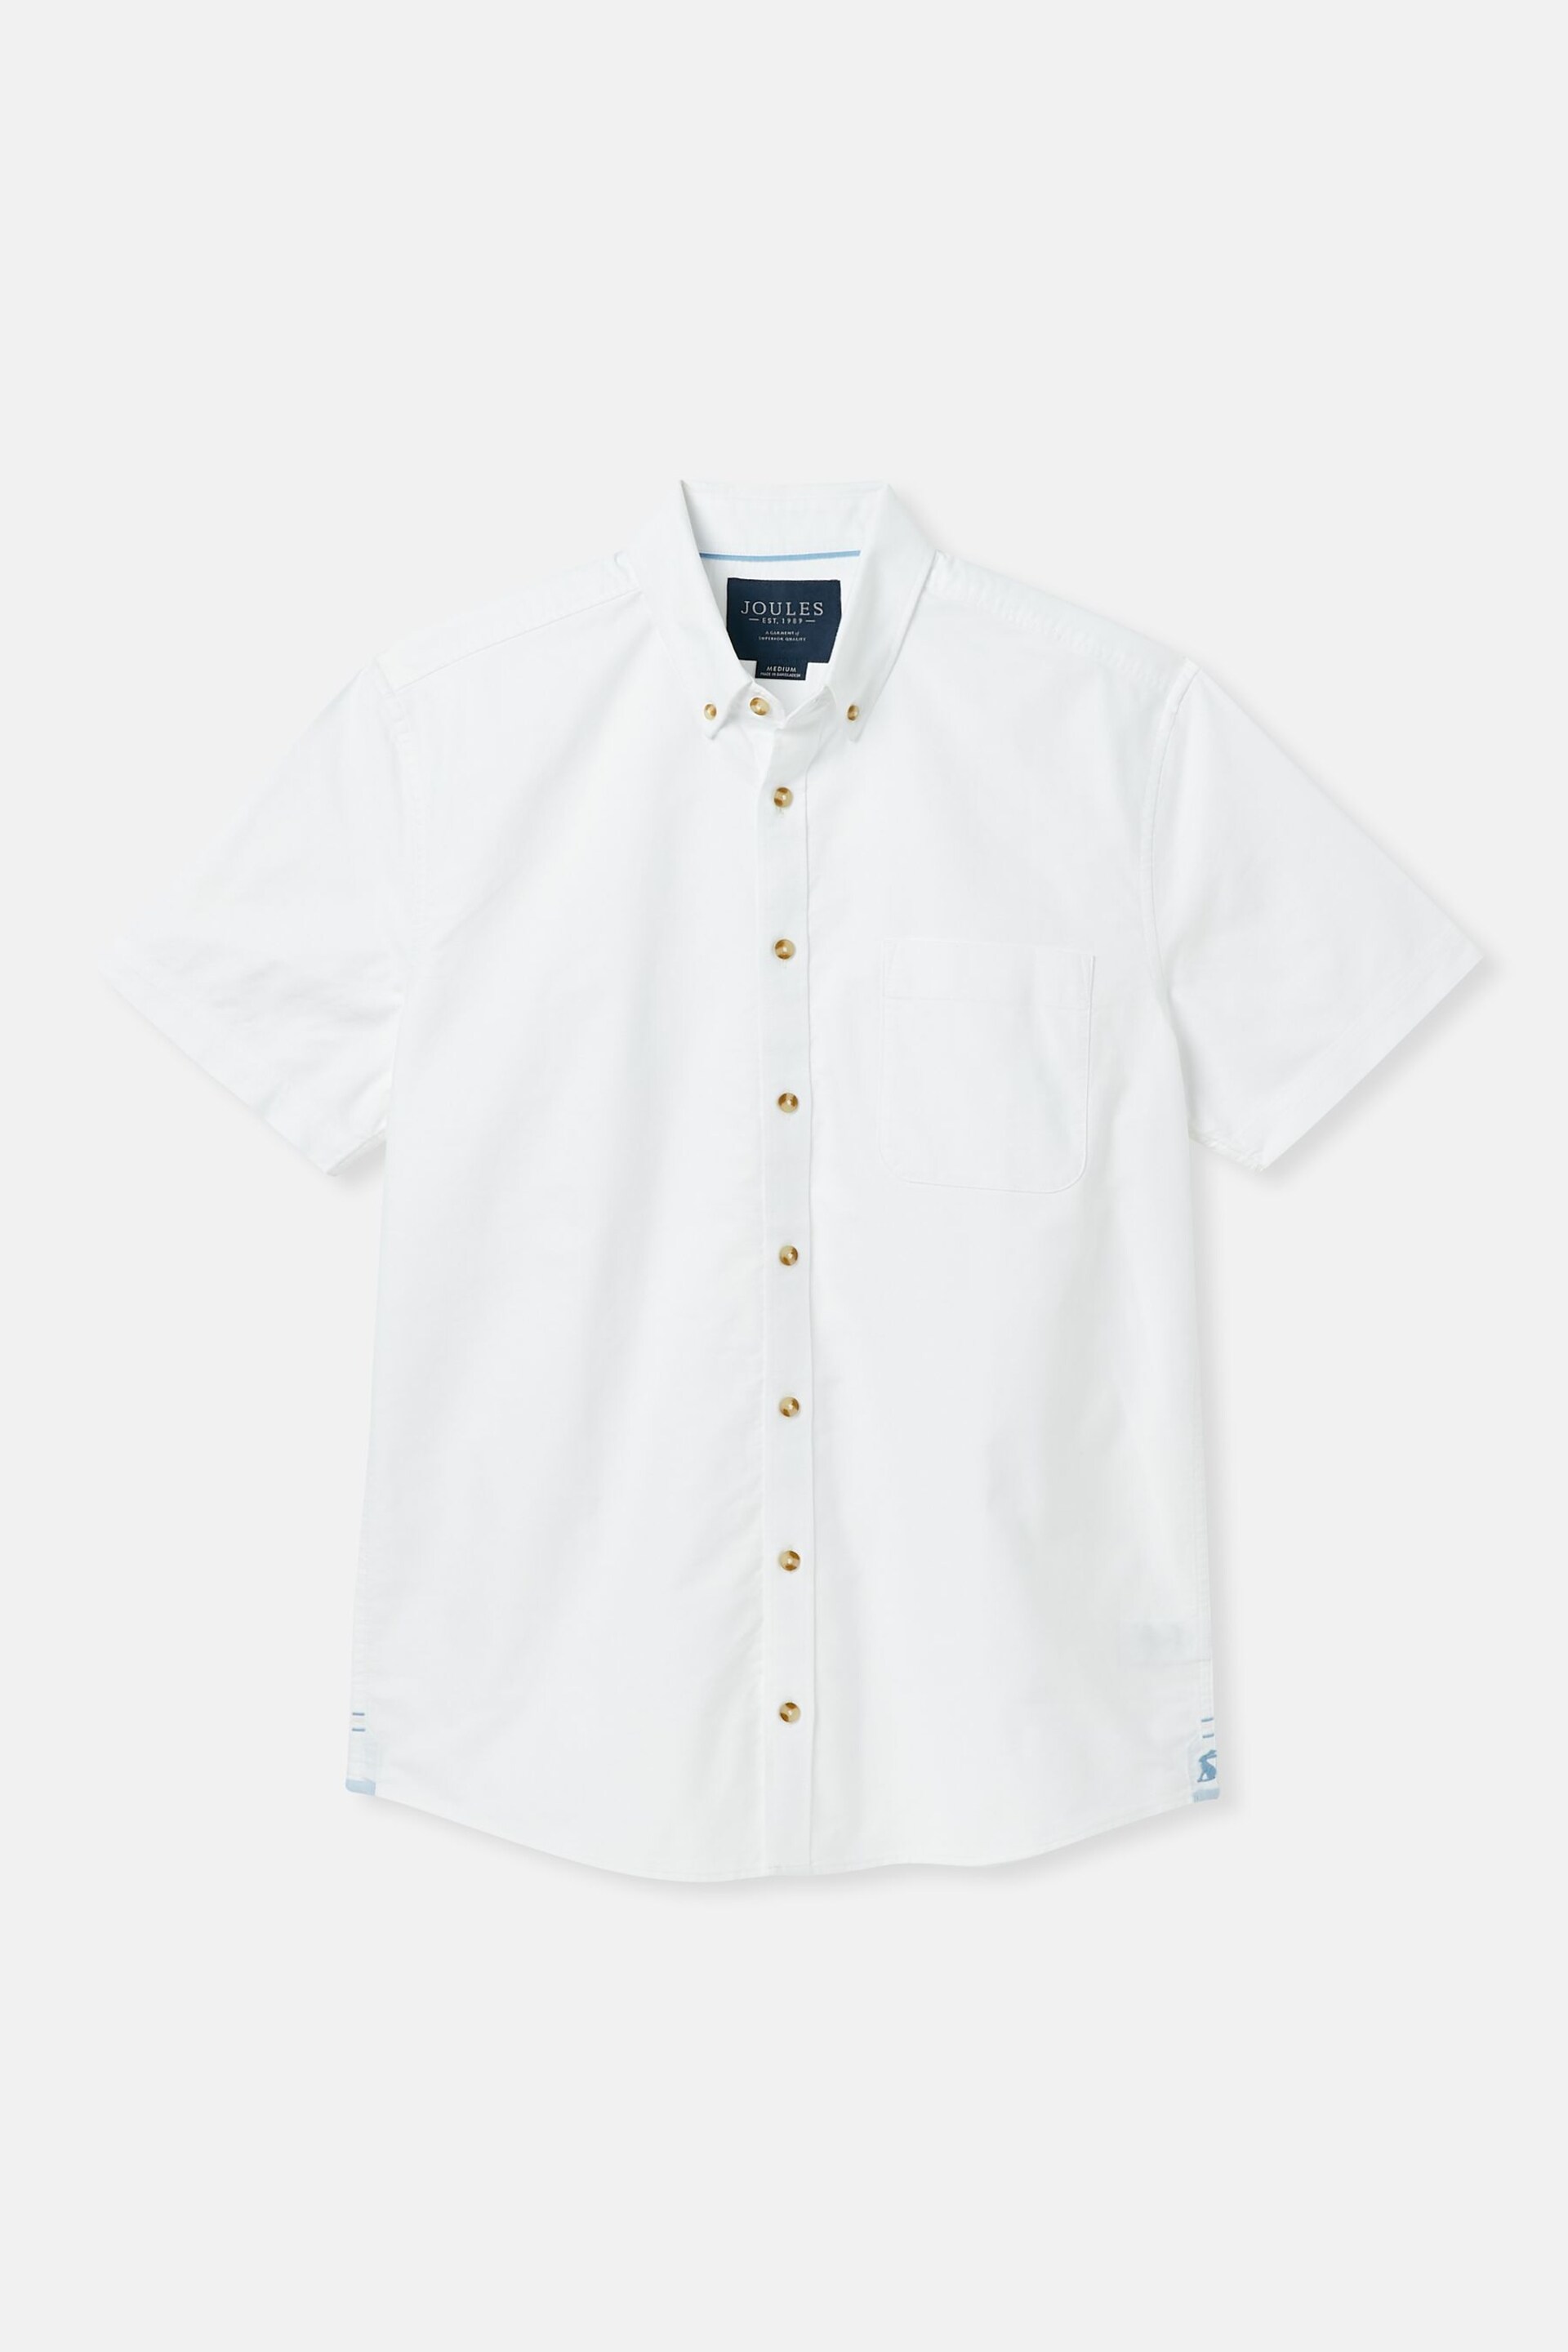 Joules Oxford White Short Sleeve Classic Fit Shirt - Image 7 of 7